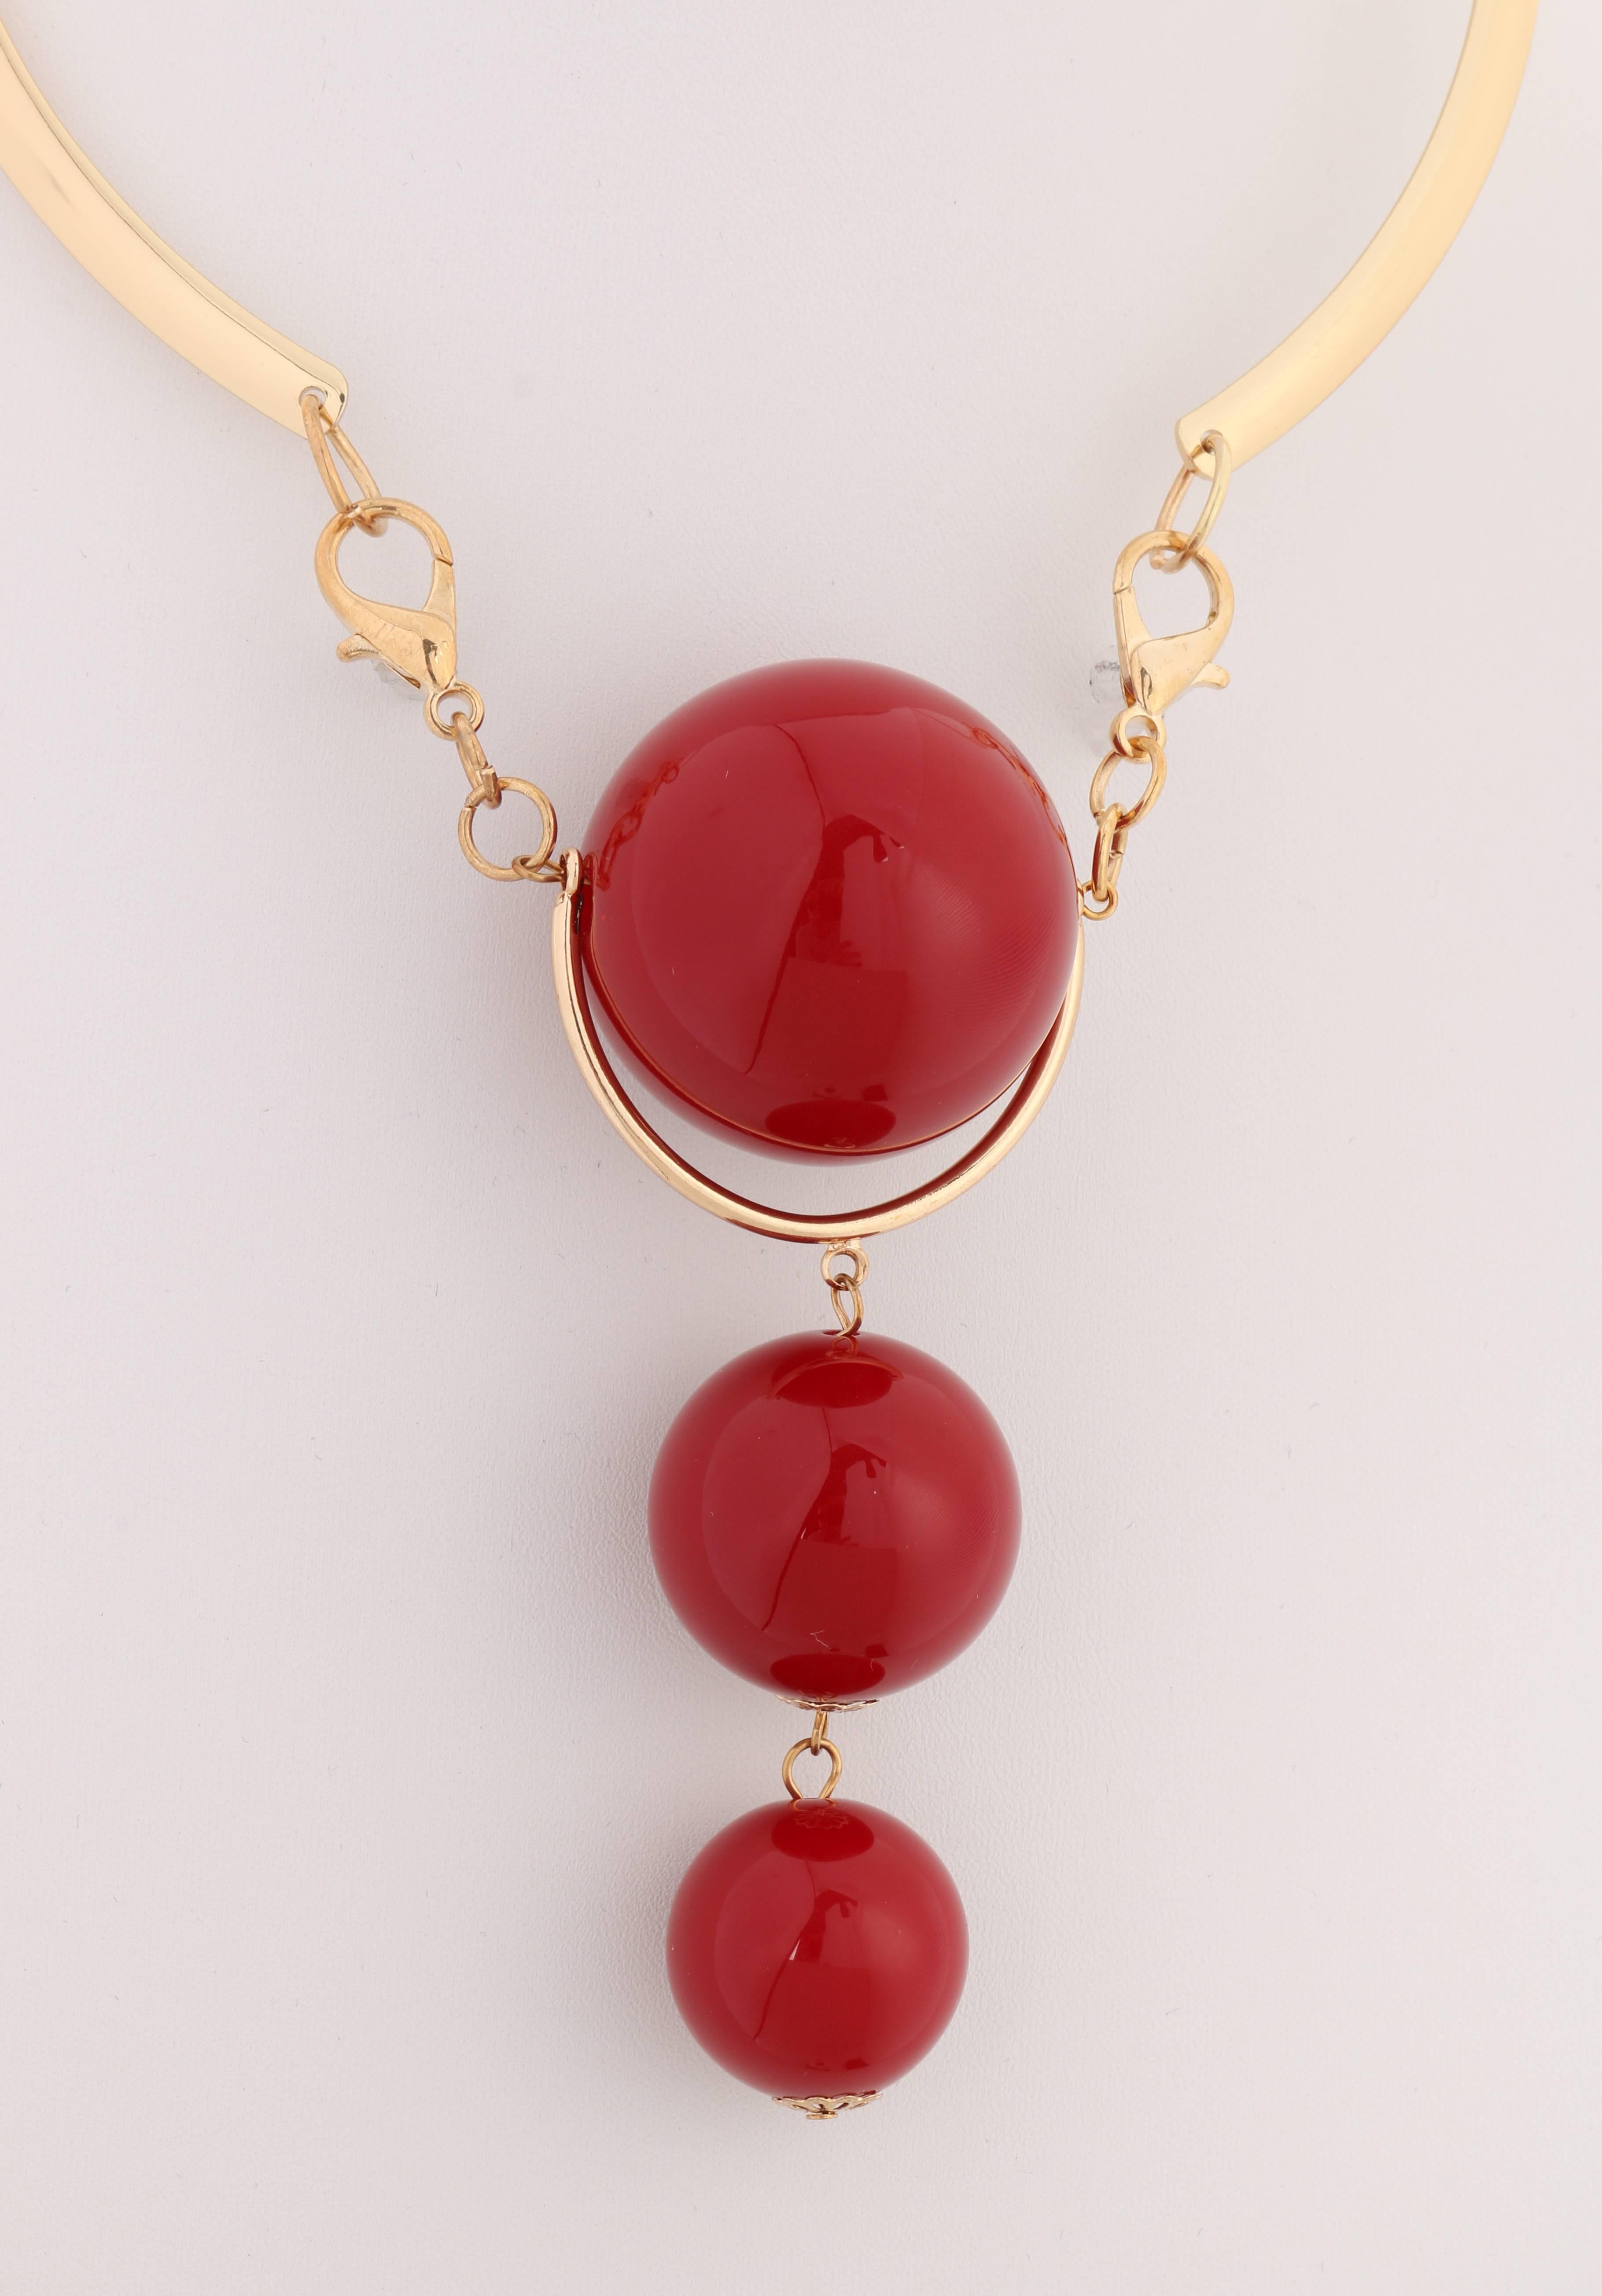 Vintage Versace c.1980's new old stock gold & red modernist sphere pendant choker designed by Ugo Correani. Large modernist pendant made up of three red glossy plastic spheres in varying sizes (38mm - 25mm). Bottom two spheres hang from a thin